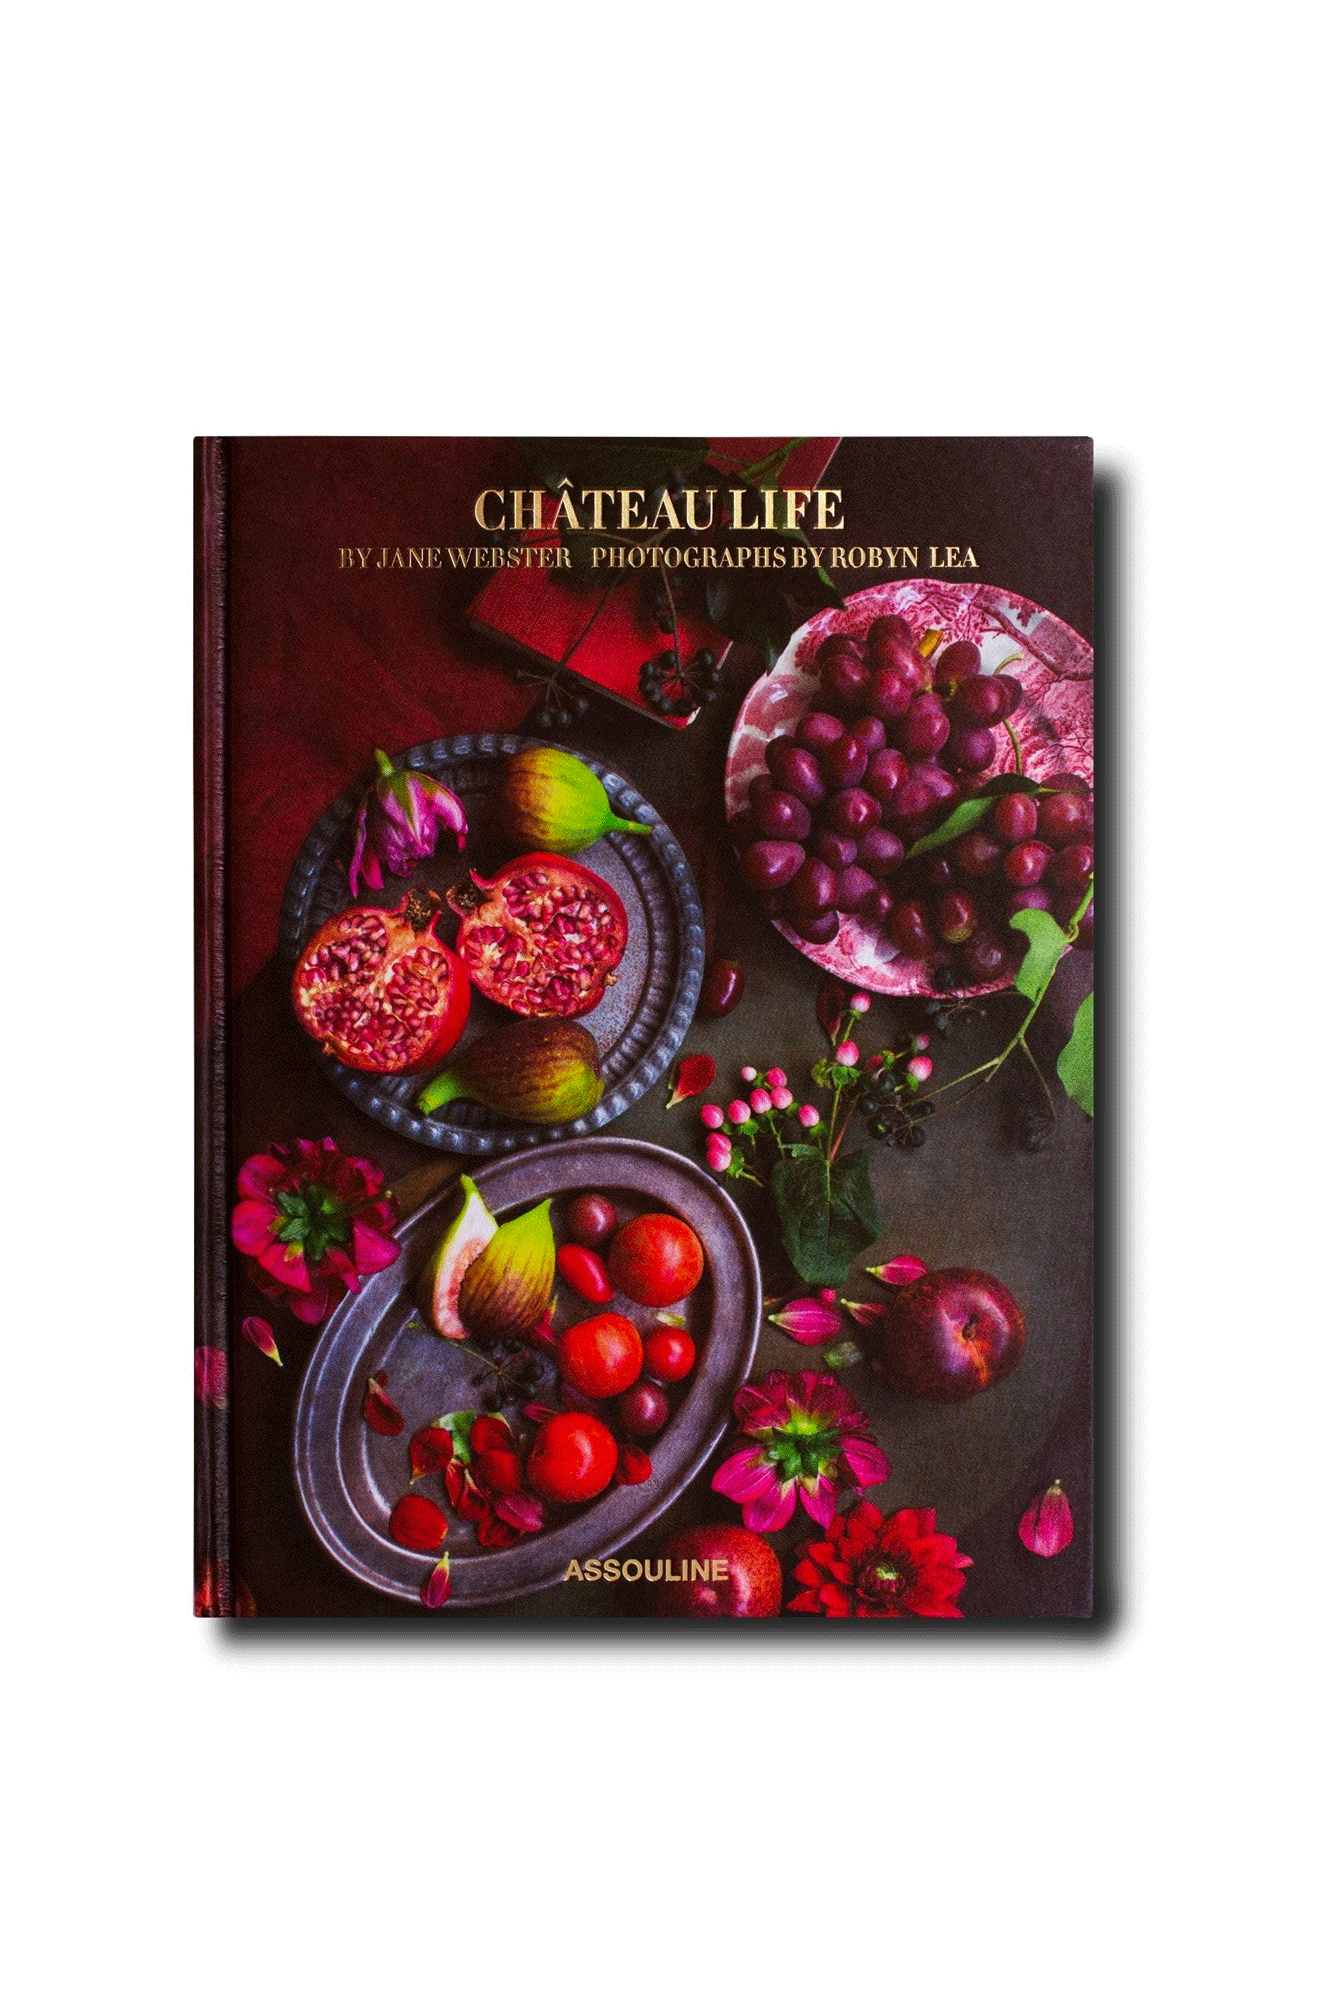 Discover the French art of slow food with Château Life from Assouline. Enjoy 60 recipes from Jane Webster's Normandy home, including holiday traditions, lunch box contents, and the Sunday long lunch. Expert photographs capture the exquisite beauty of European hospitality combined with a modern, busy lifestyle. Add a touch of French flair to your daily routines and feel the joys of living la vie de château.